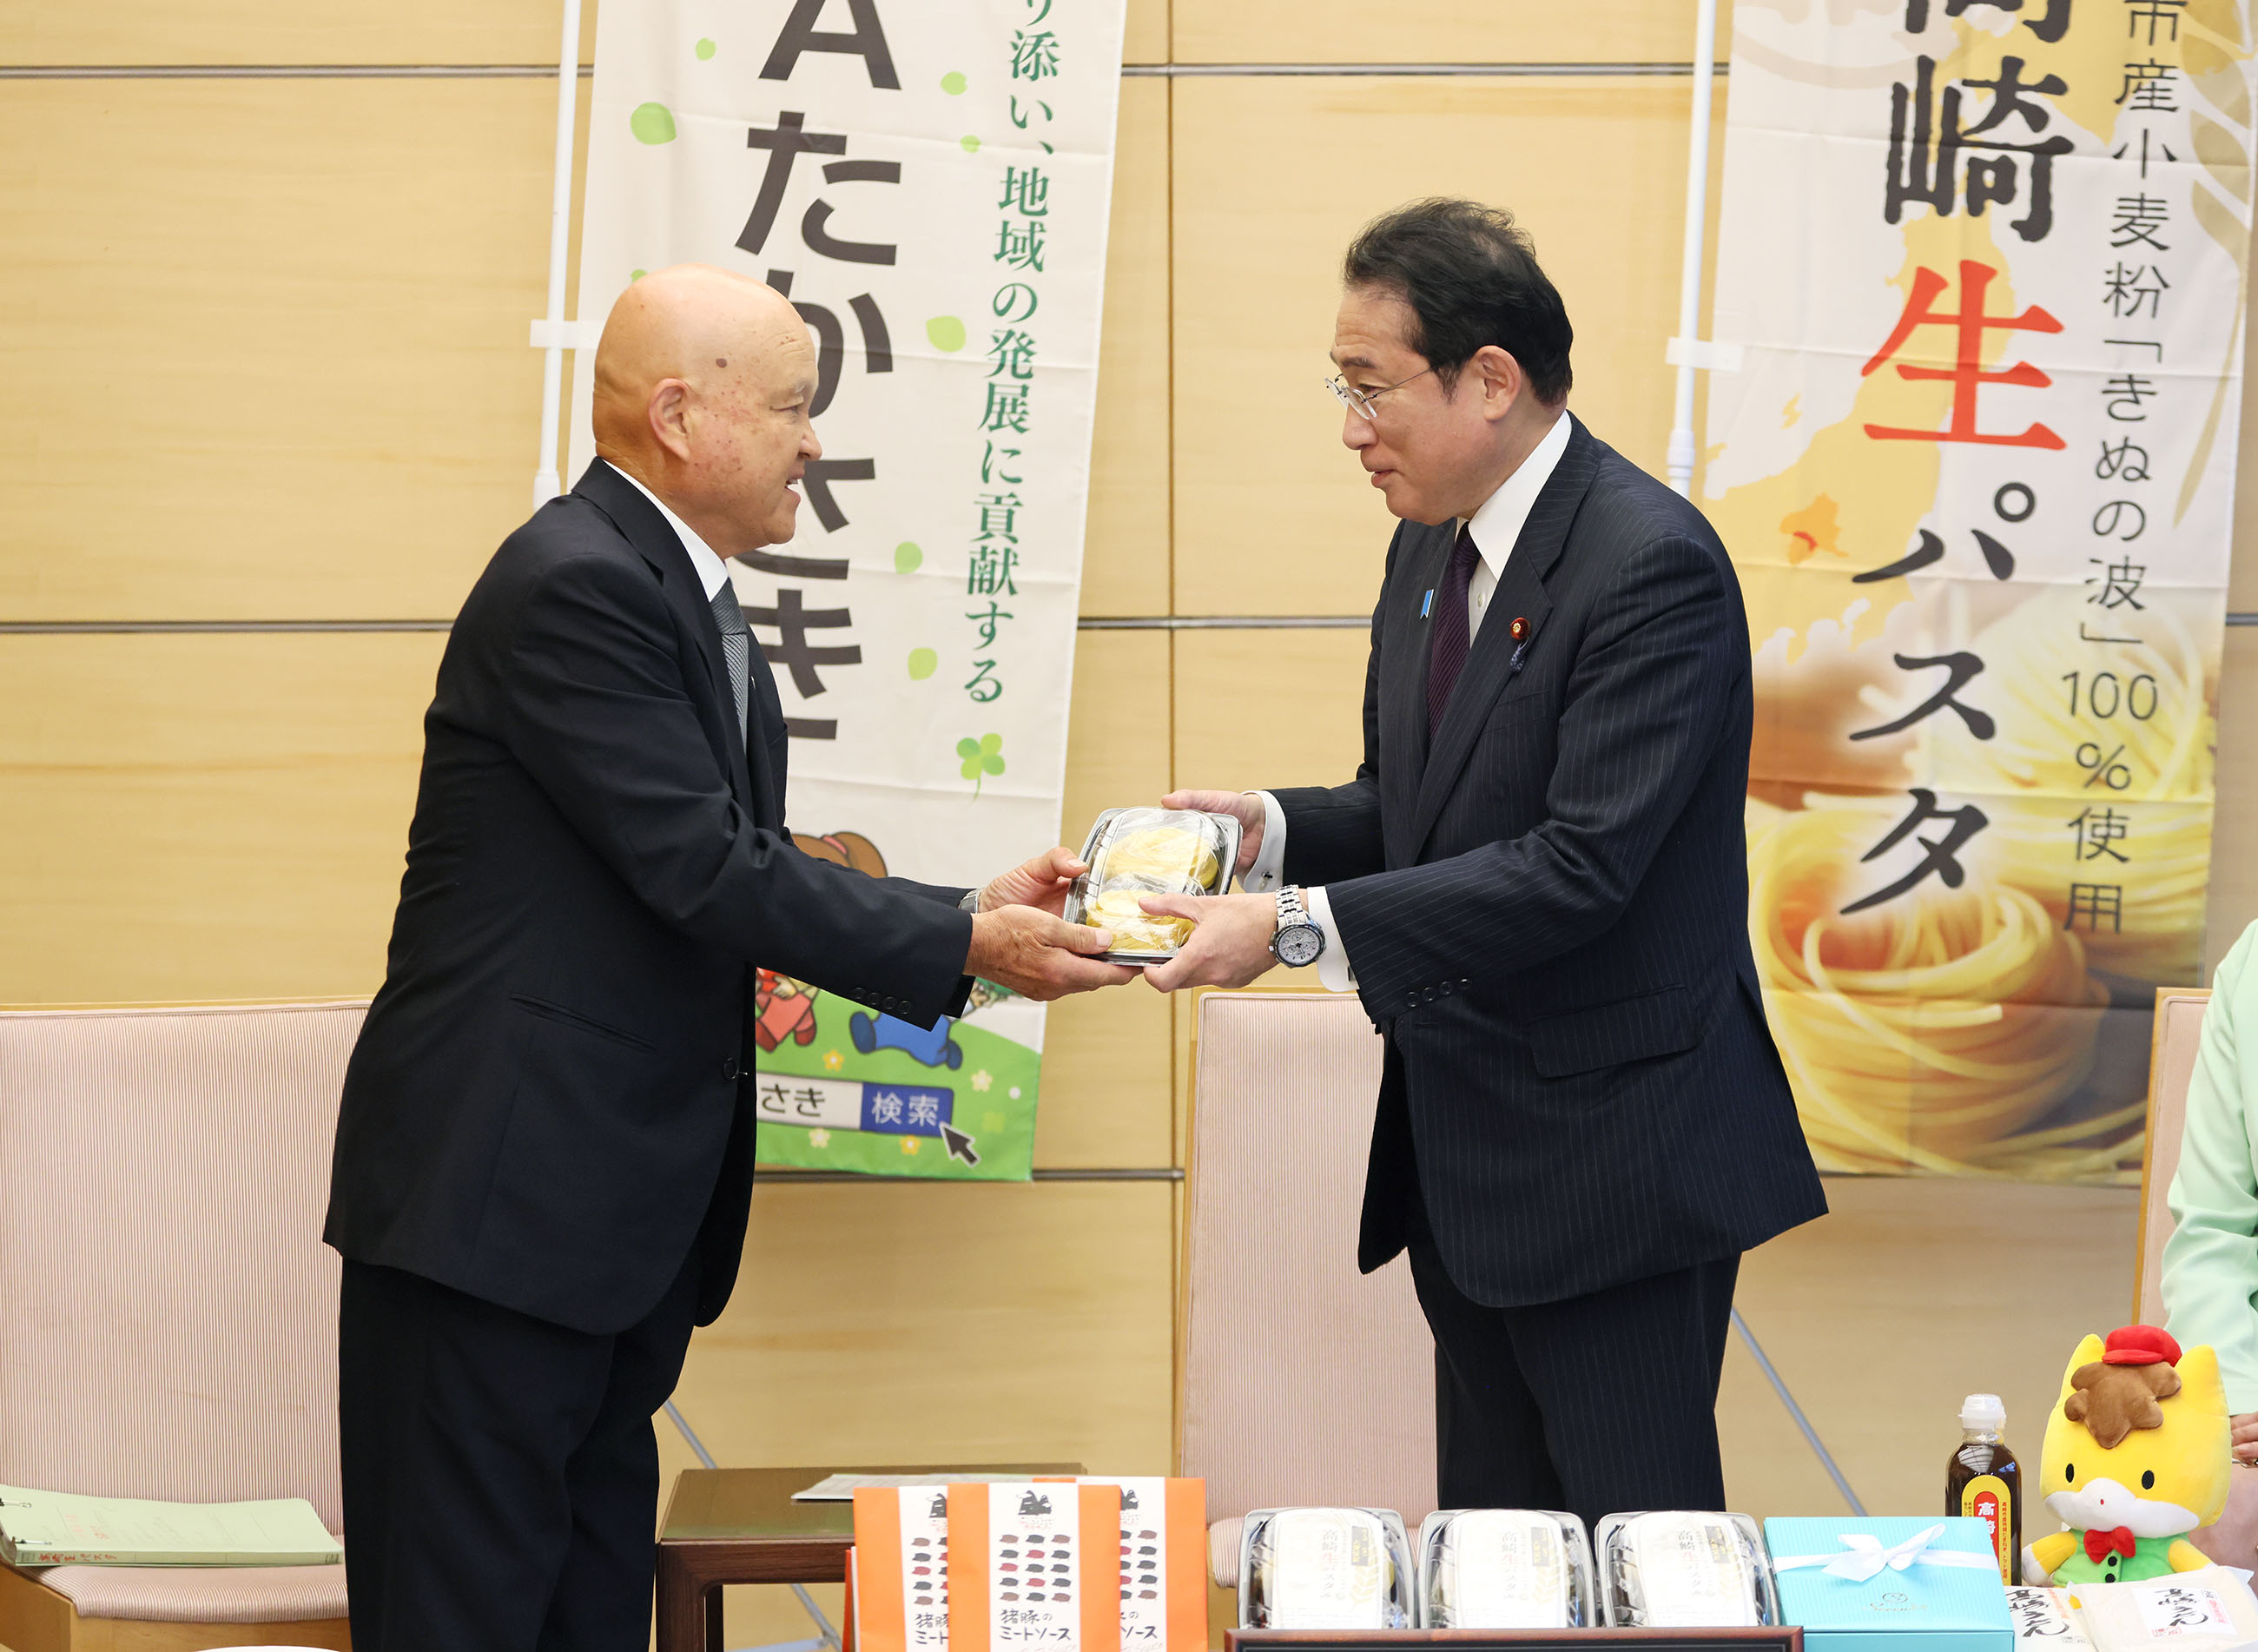 Prime Minister Kishida being presented with fresh pasta (2)